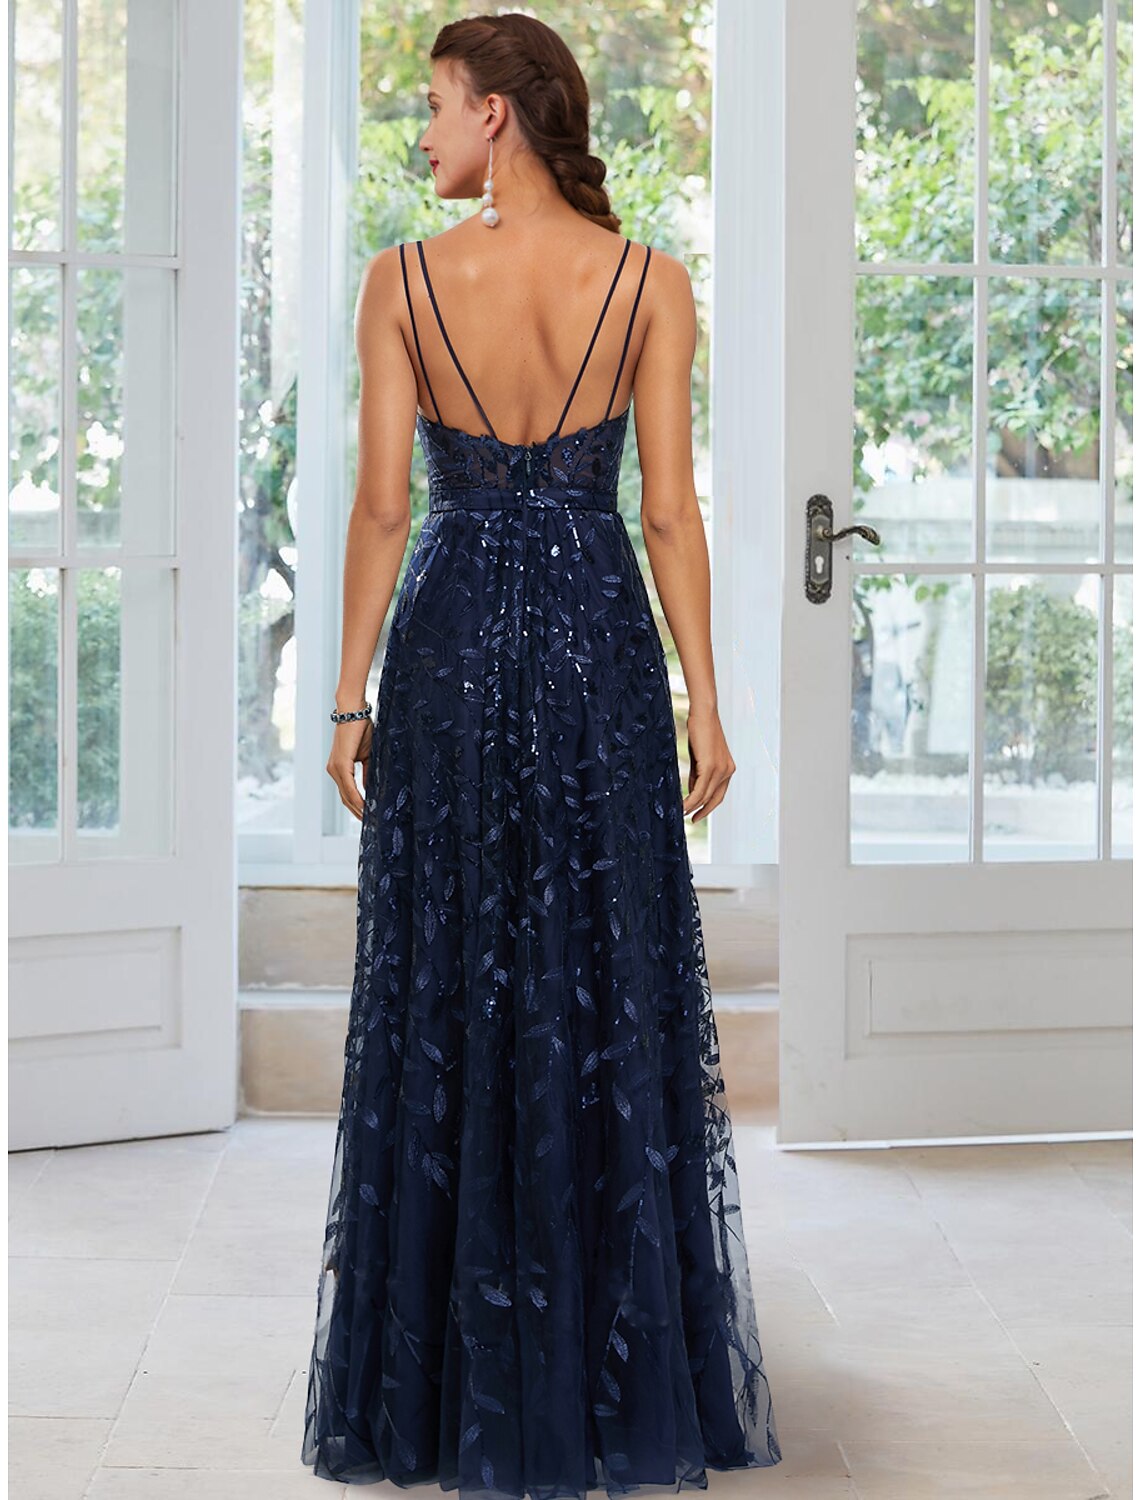 A-Line Evening Gown Floral Dress Formal Floor Length Sleeveless Spaghetti Strap Satin with Slit Appliques